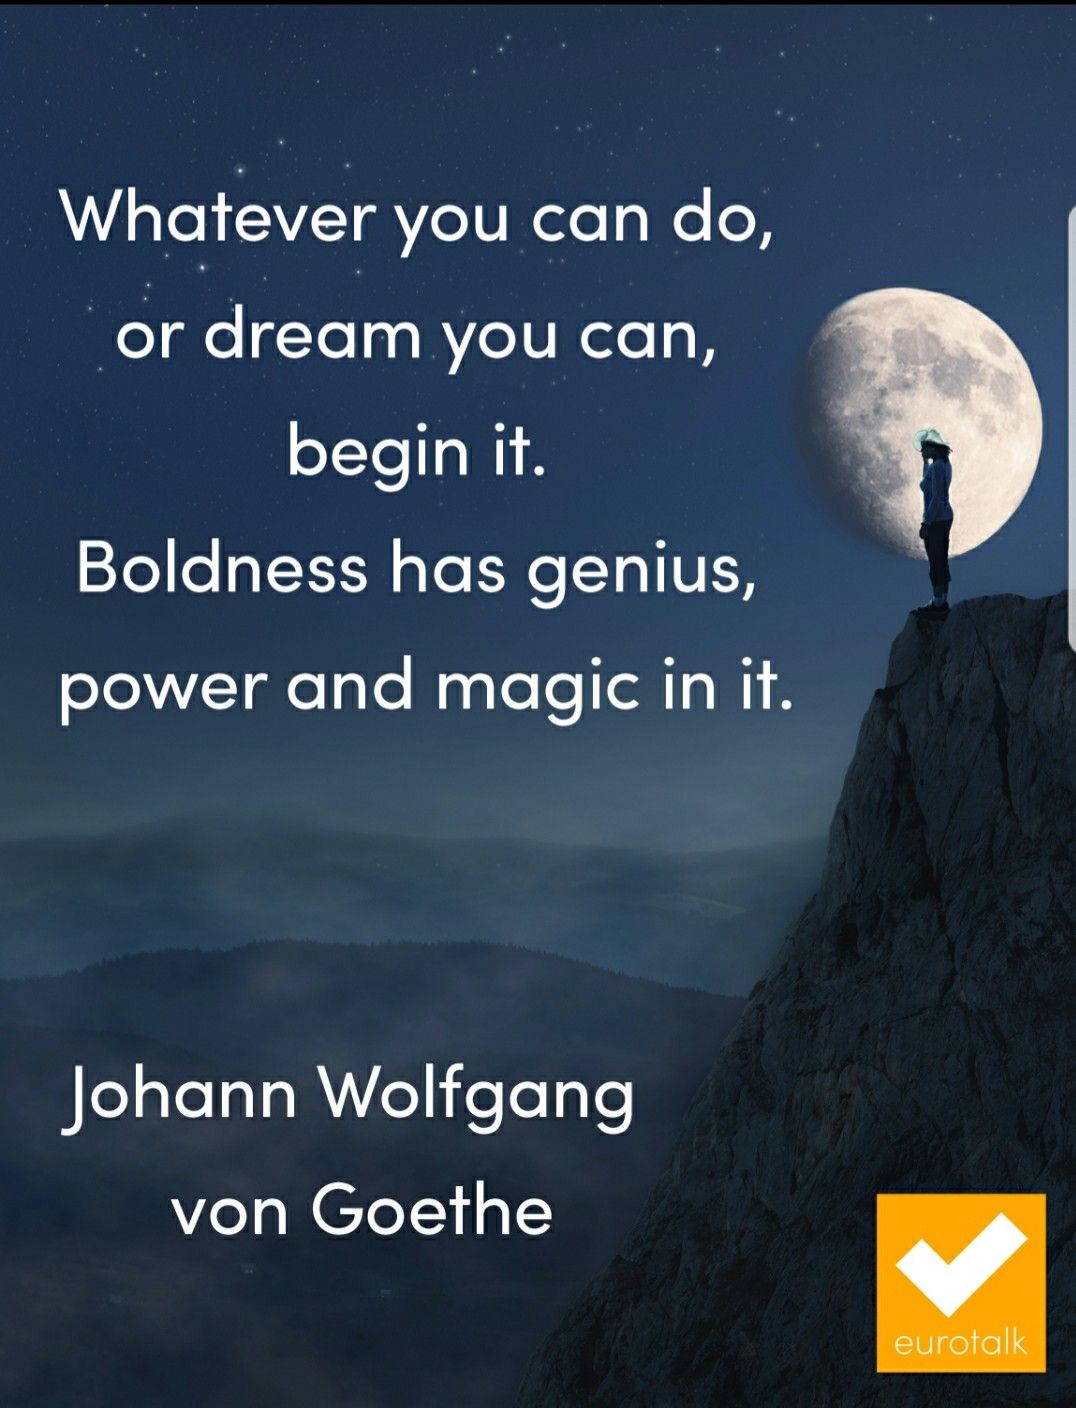 Pin by Stephanie Best on Great Quotes Moonlight quotes, Goethe